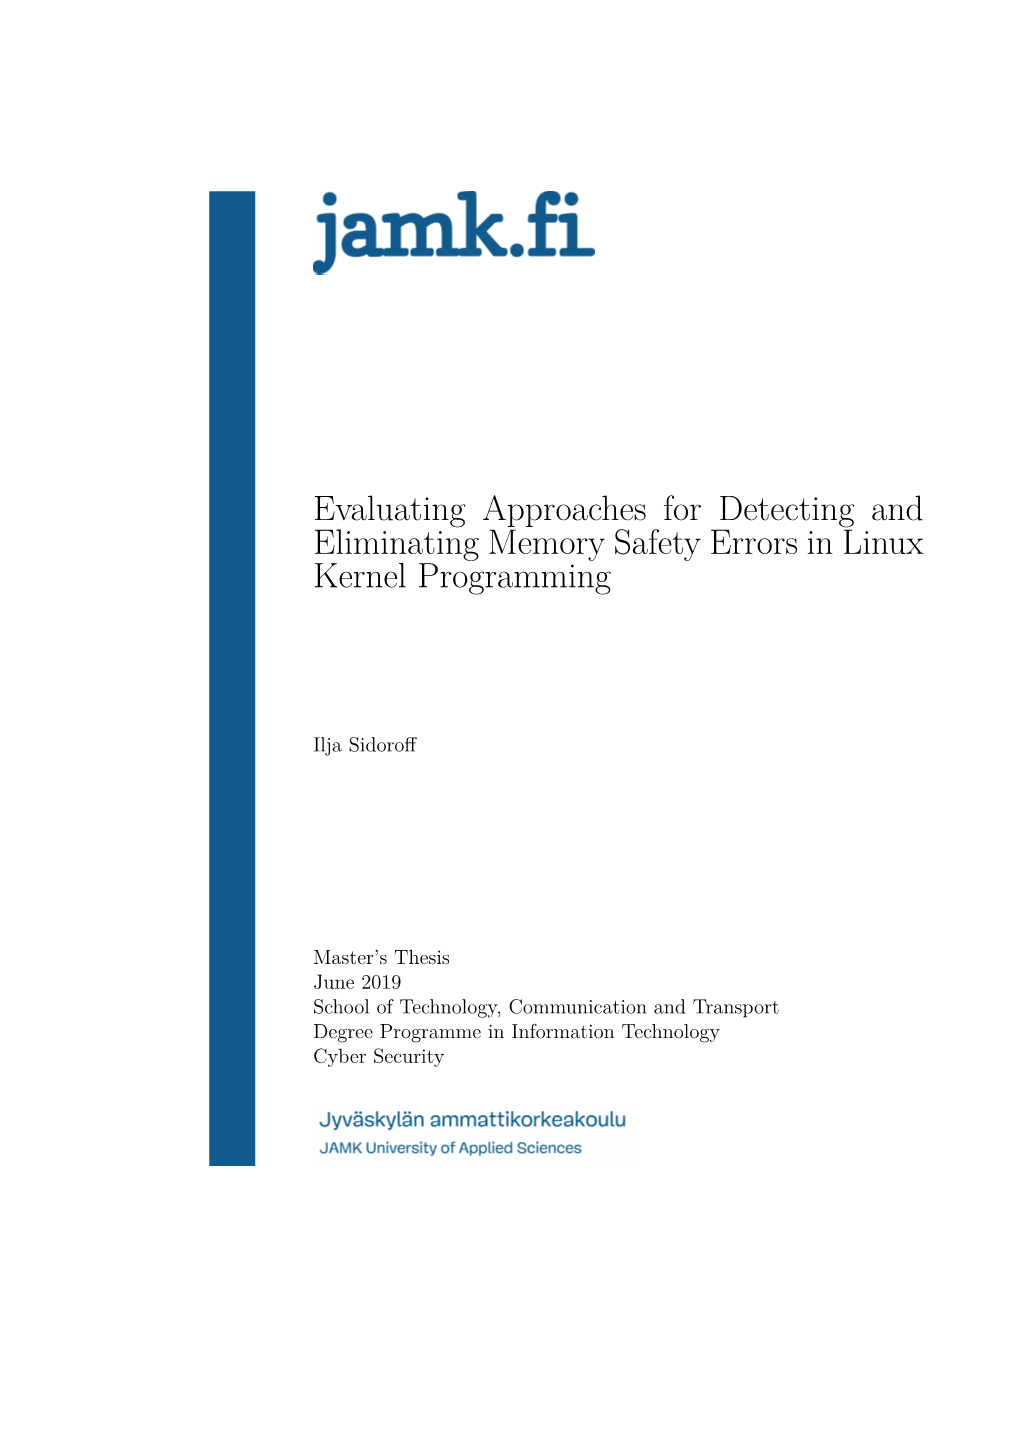 Evaluating Approaches for Detecting and Eliminating Memory Safety Errors in Linux Kernel Programming